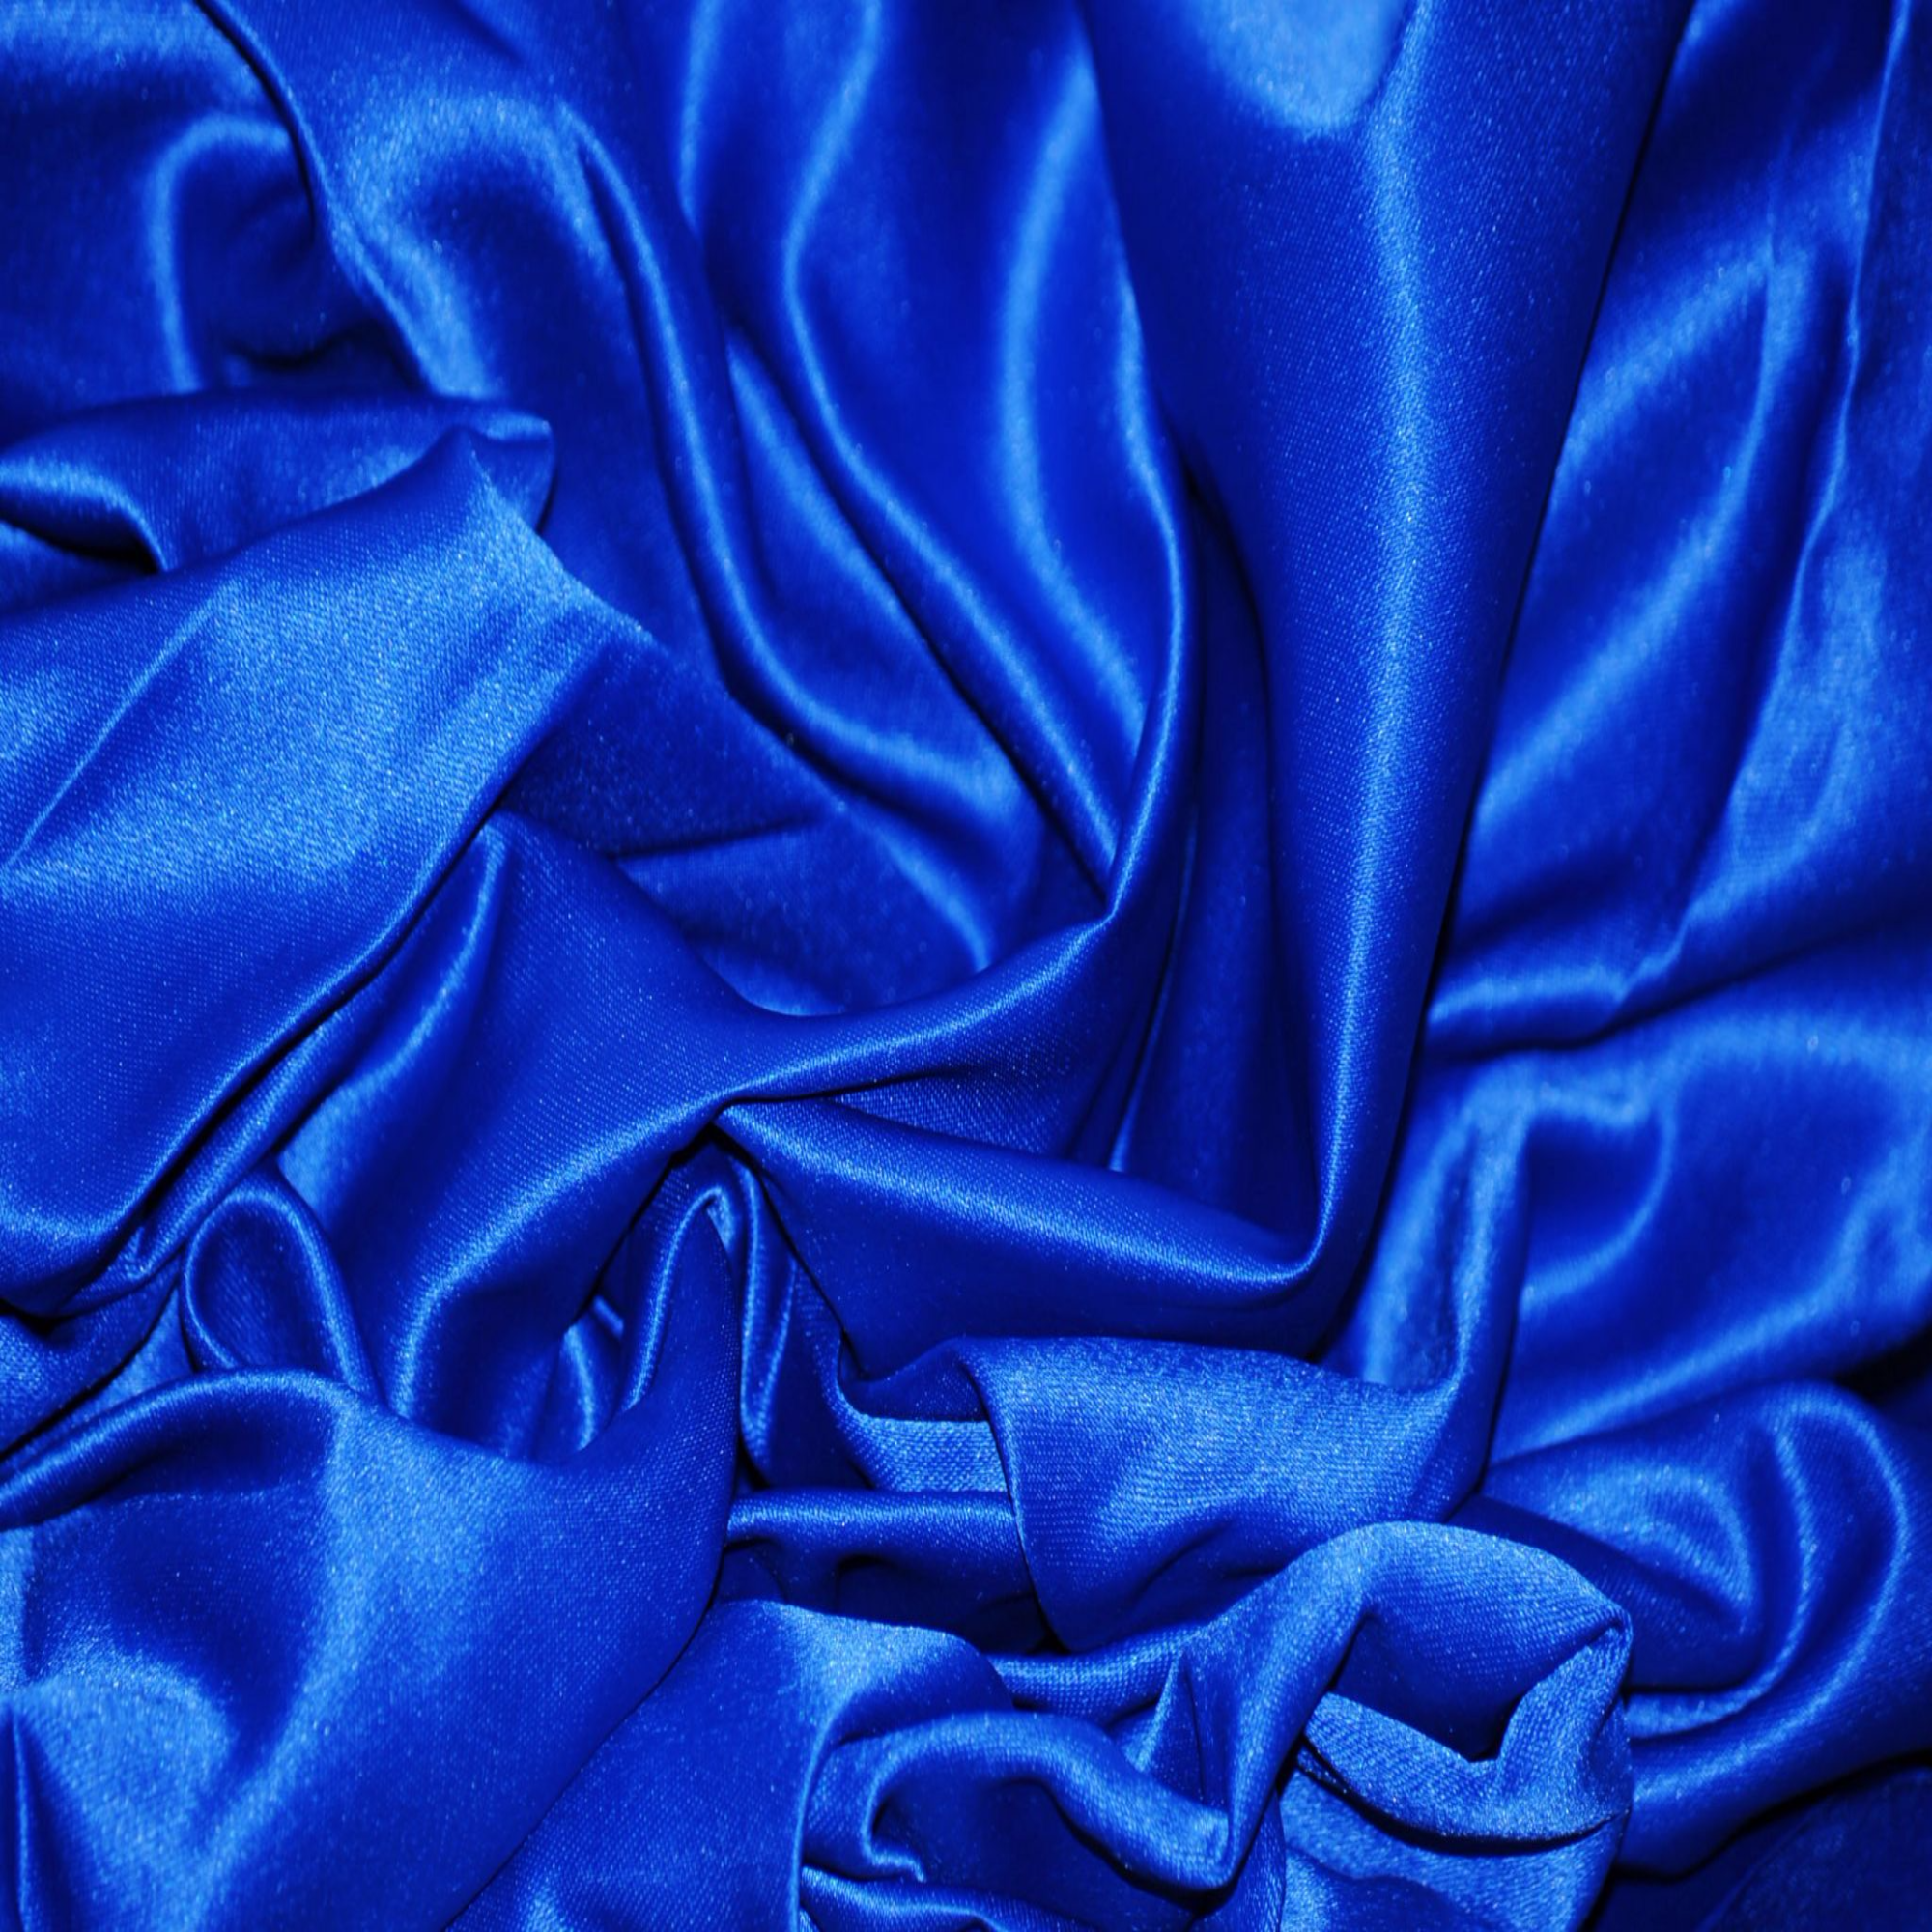 https://www.awlfabrics.co.uk/Graphics/Std_Product_Images/royal-blue-satin-fabric-from-1.20-1381-p.png